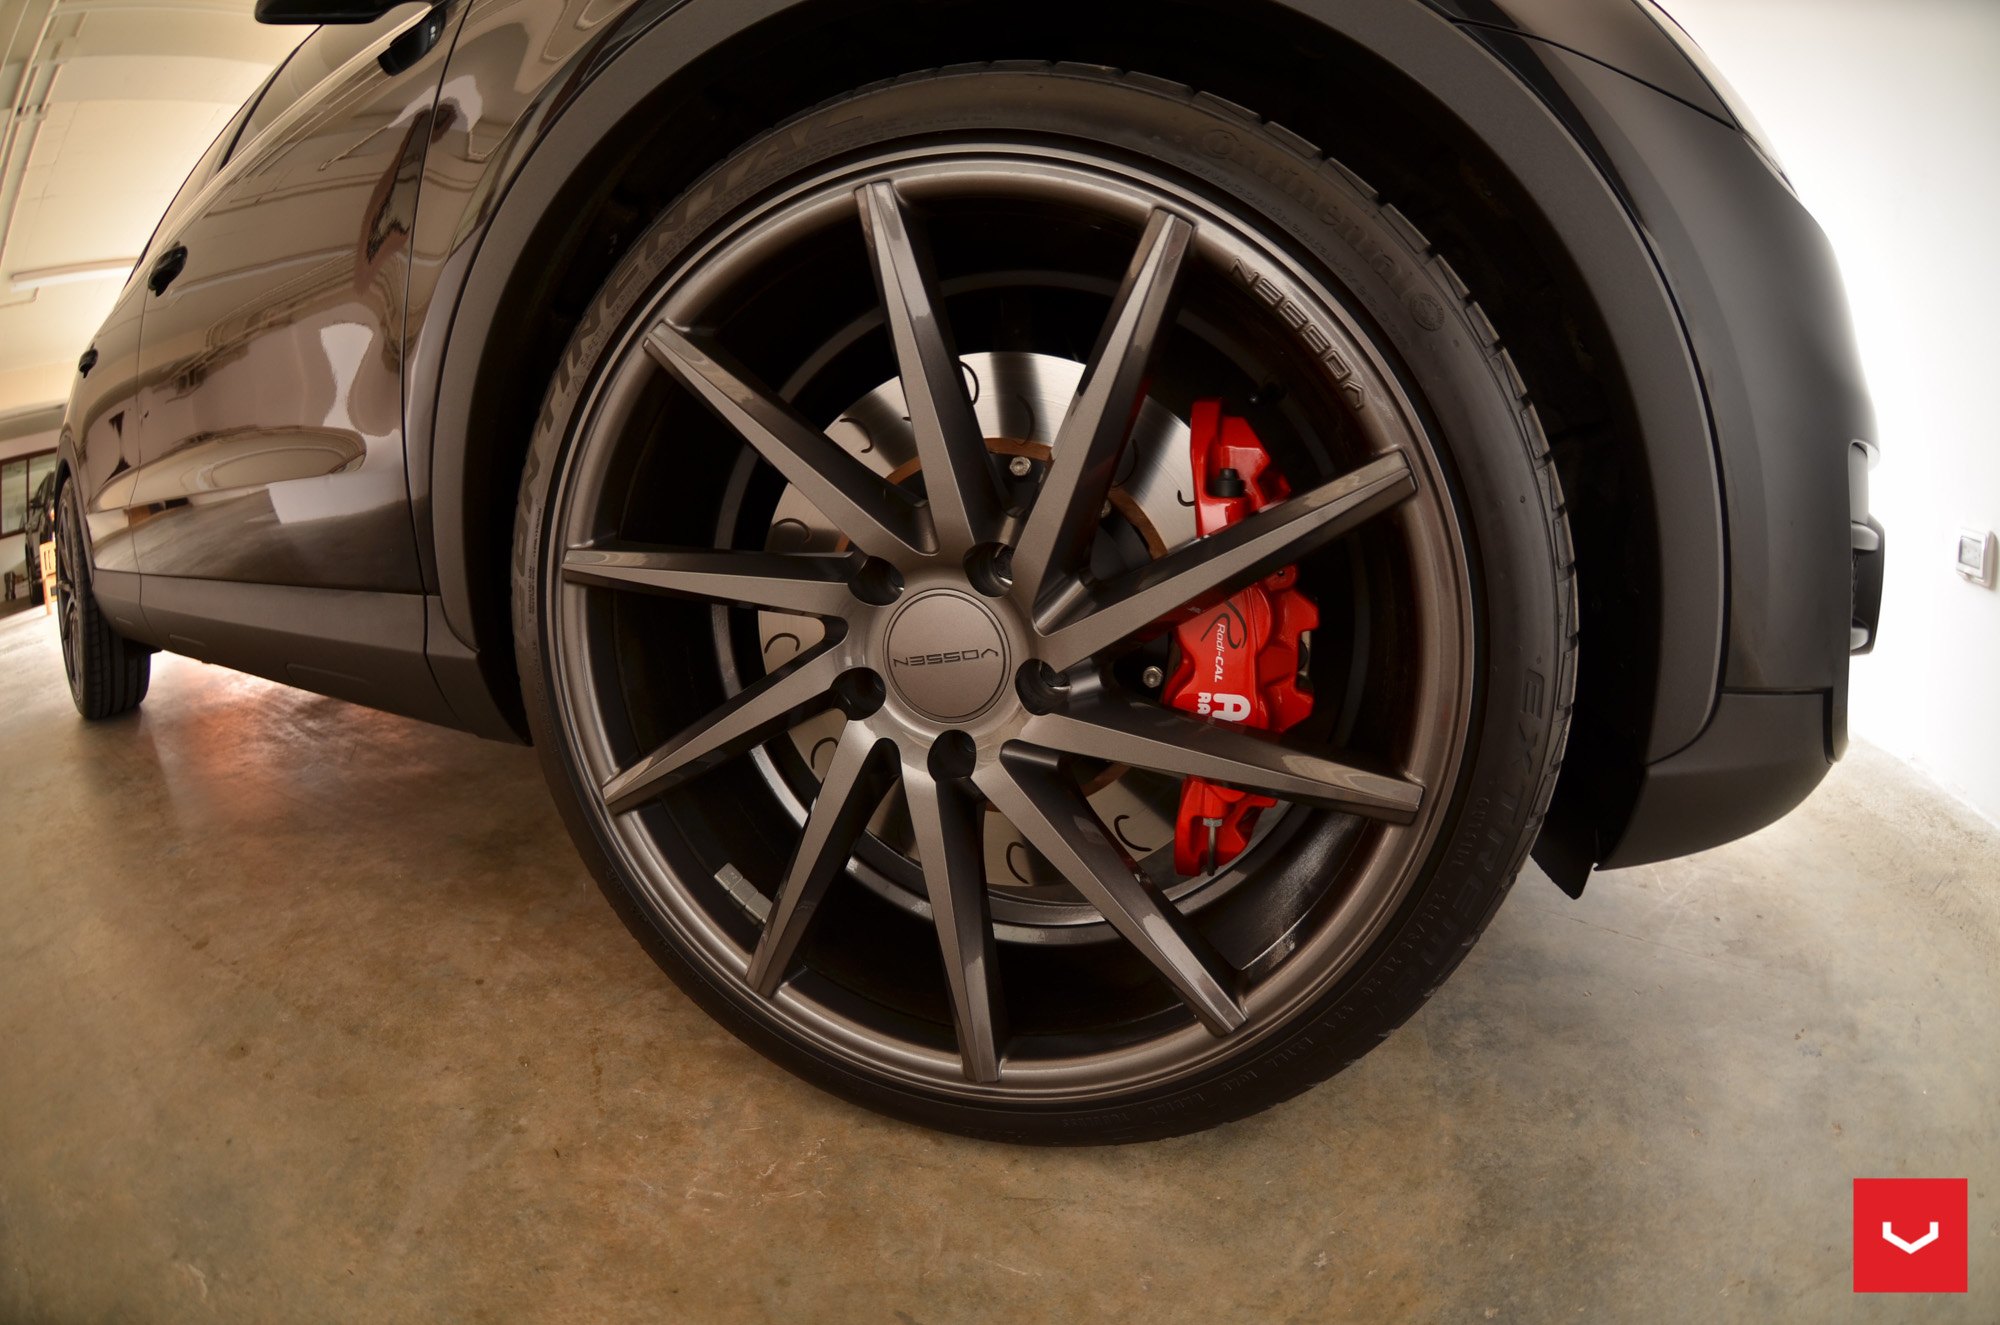 Vossen Rims And Red Performance Brakes - Photo by Vossen